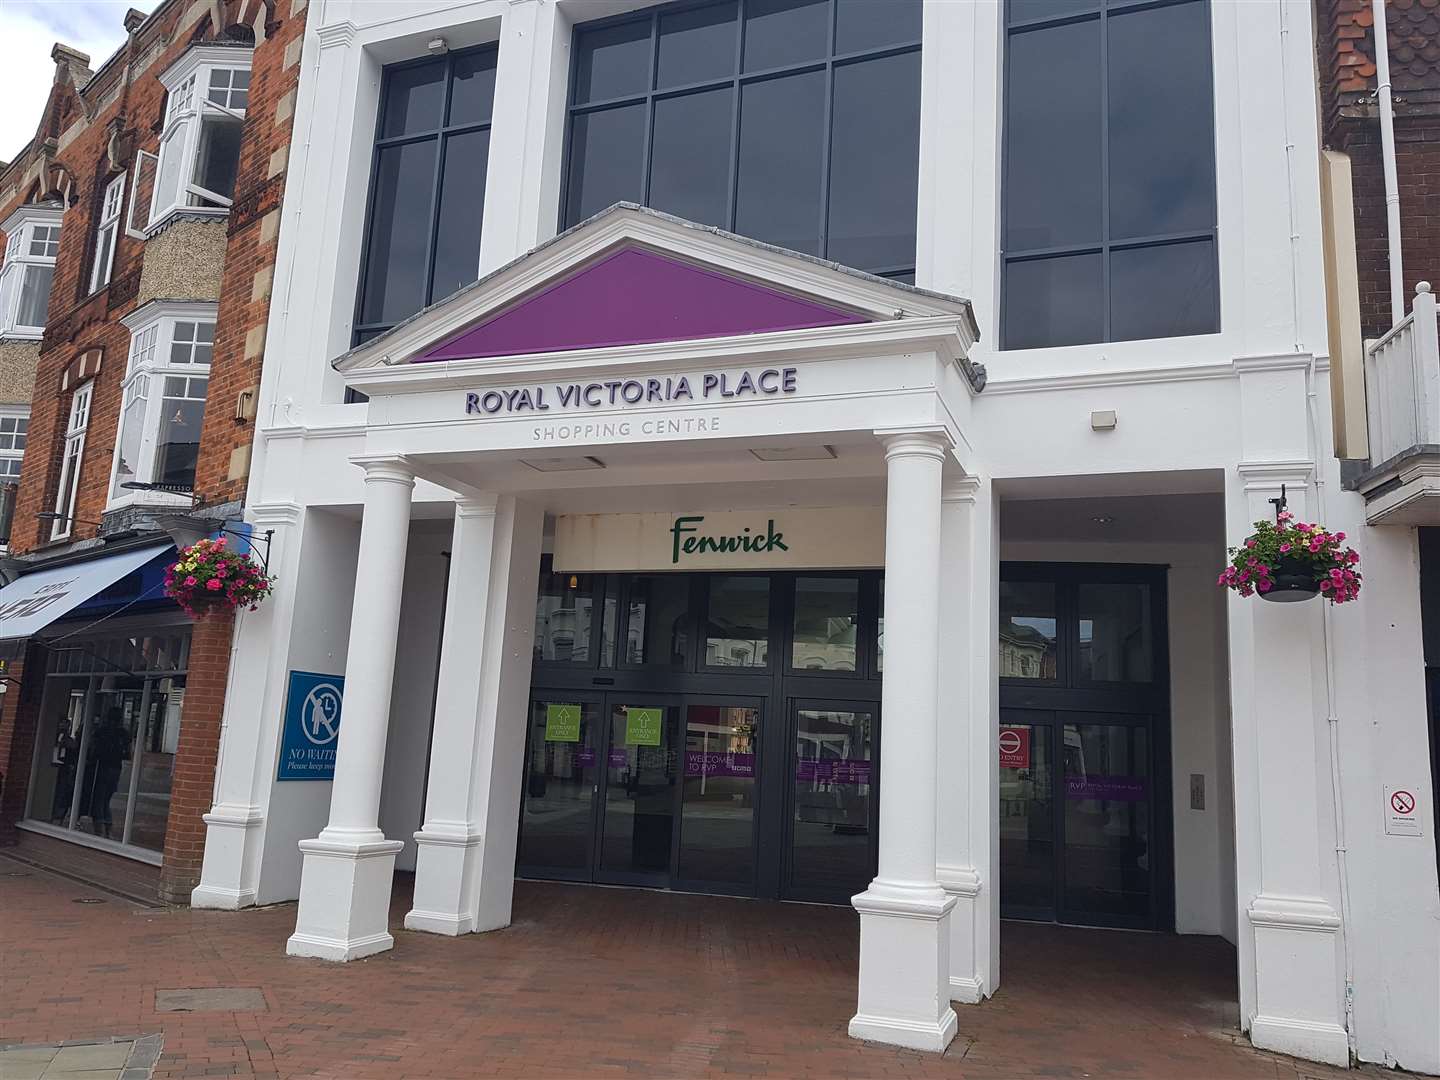 Entrance to the Royal Victoria Parade shopping mall in Tunbridge Wells